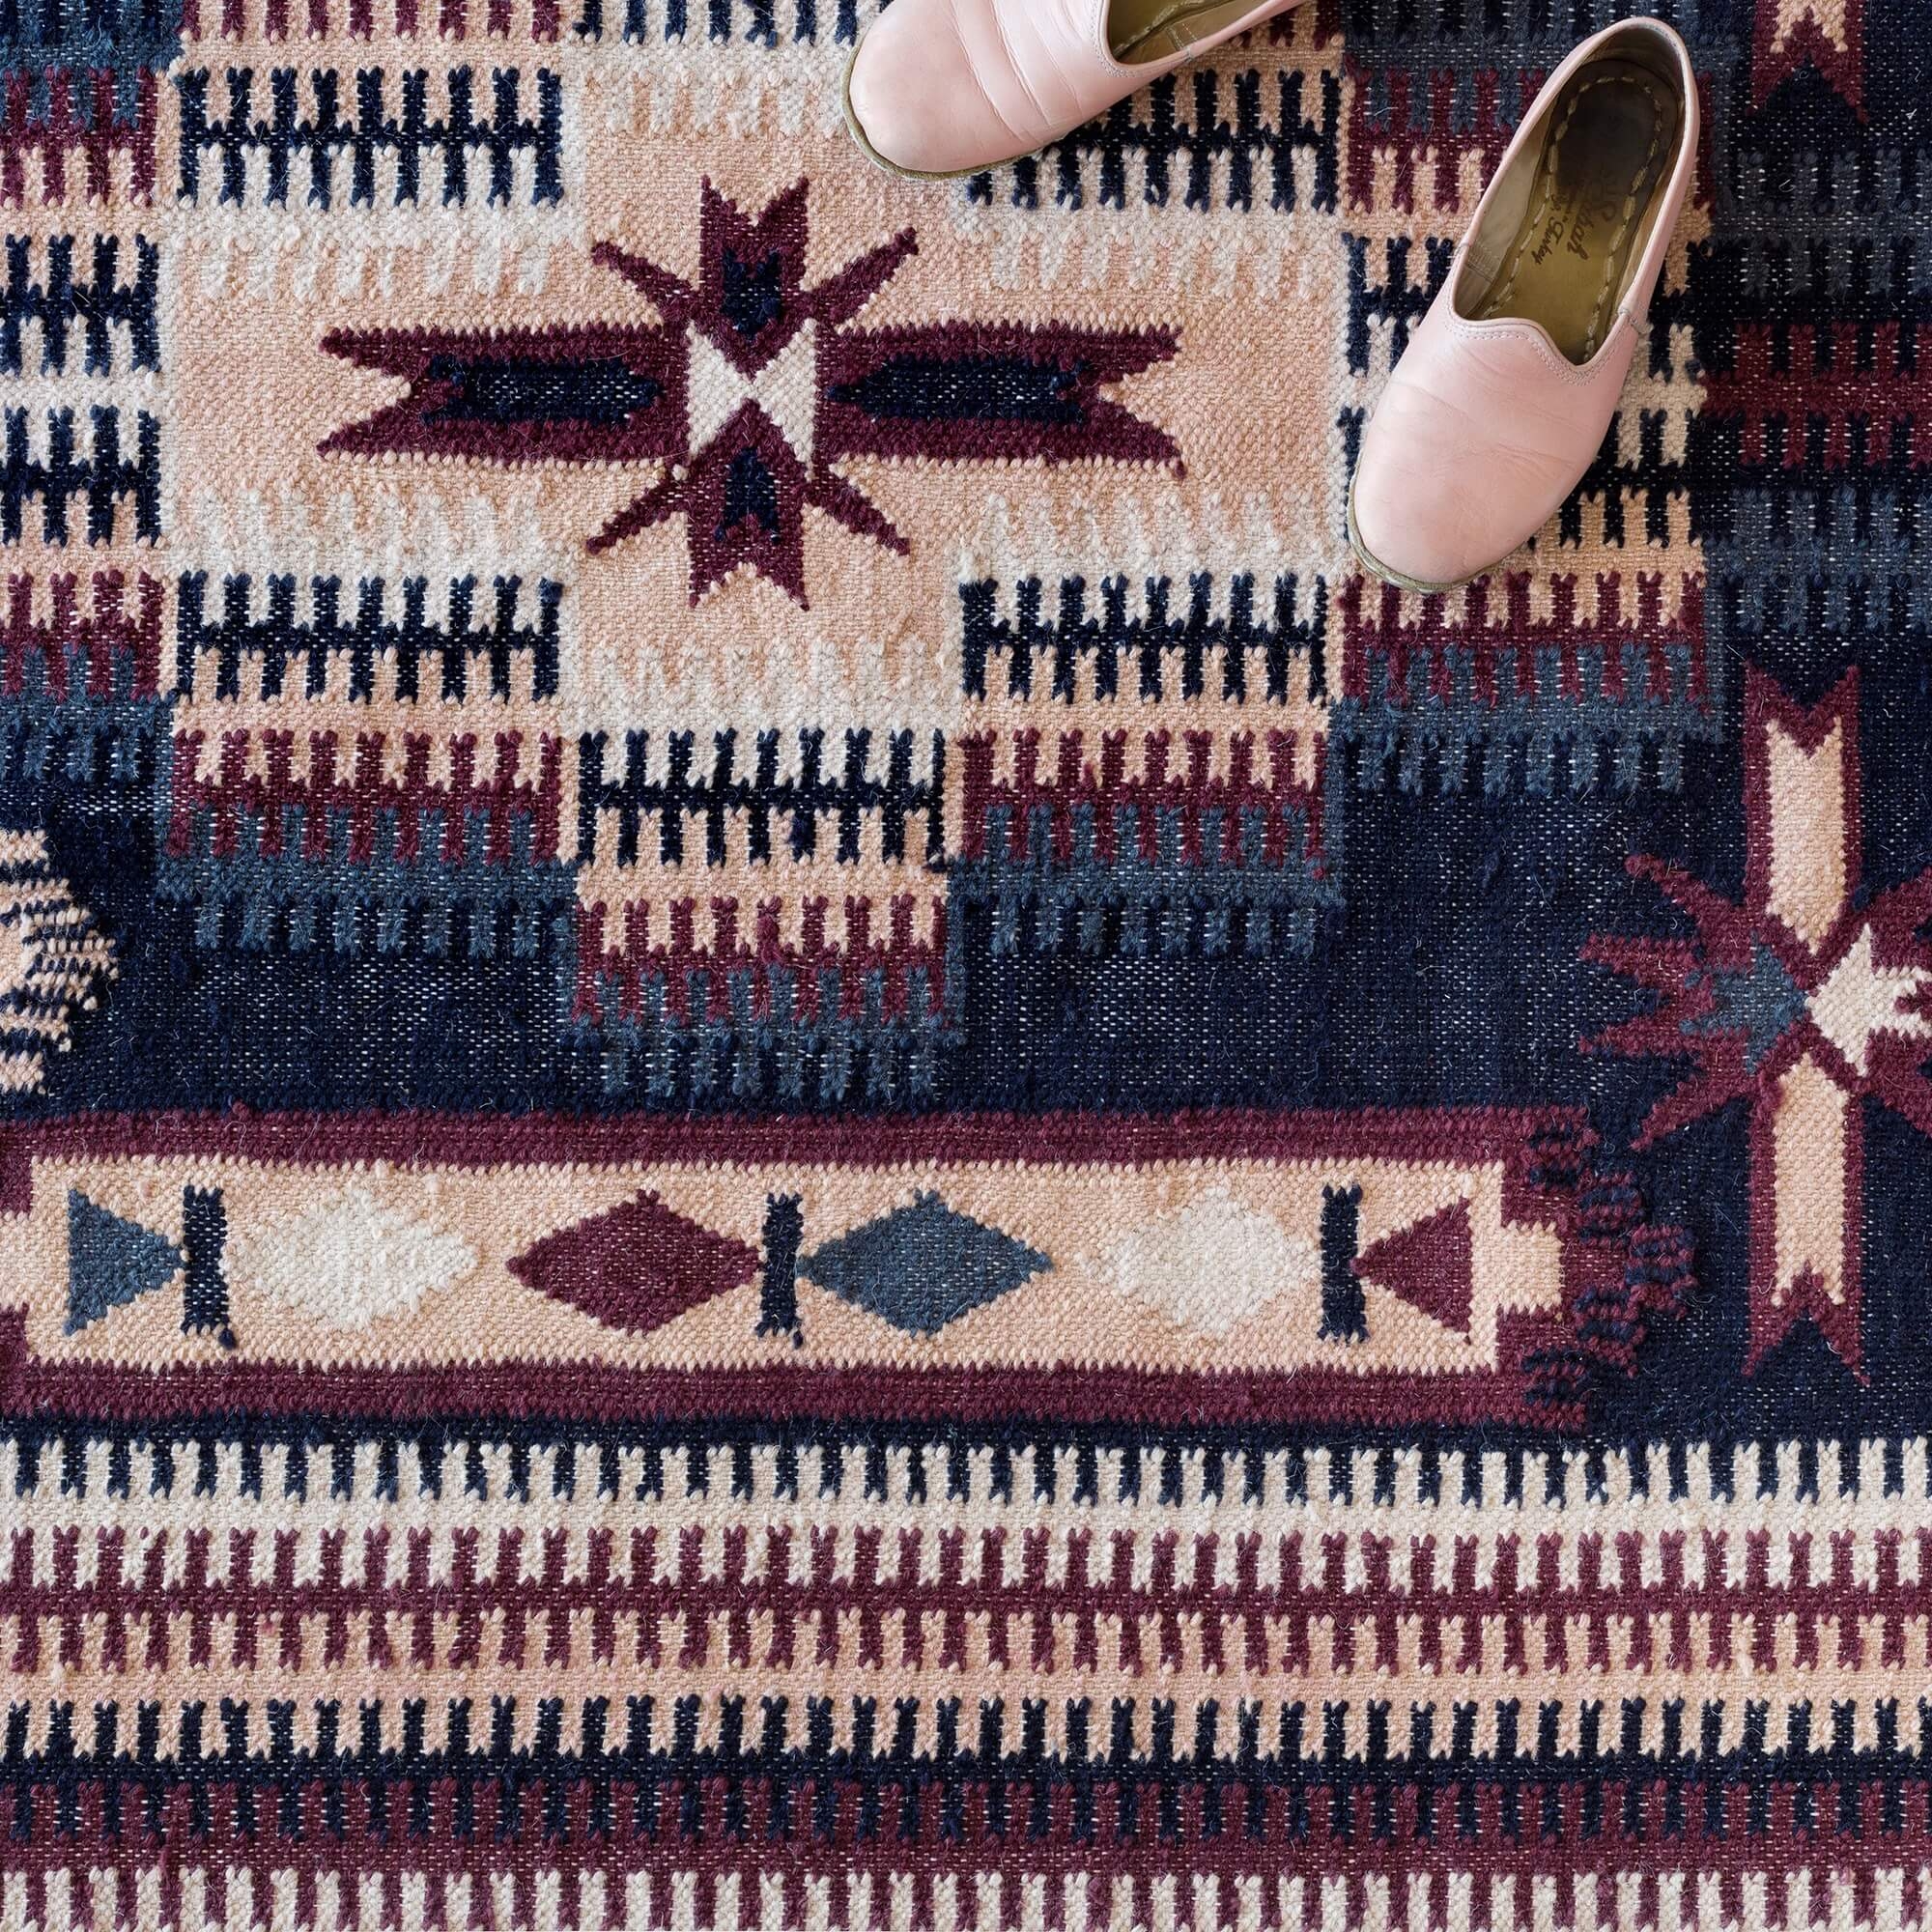 The Citizenry Keya Handwoven Area Rug | 8' x 10' | Made You Blush - Image 3